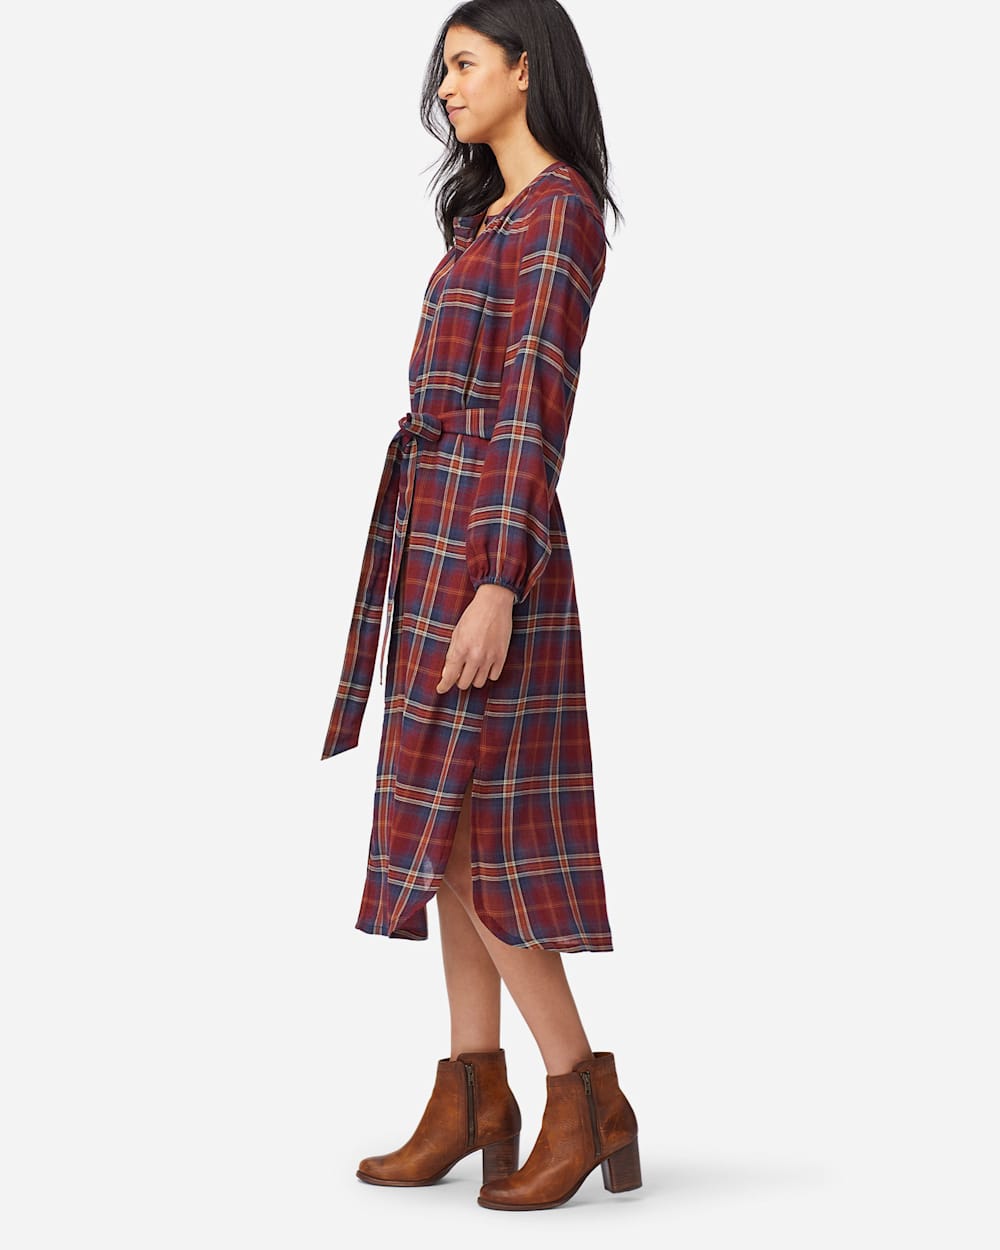 ALTERNATE VIEW OF BUTTON-FRONT PLAID DRESS IN RUST PLAID image number 2